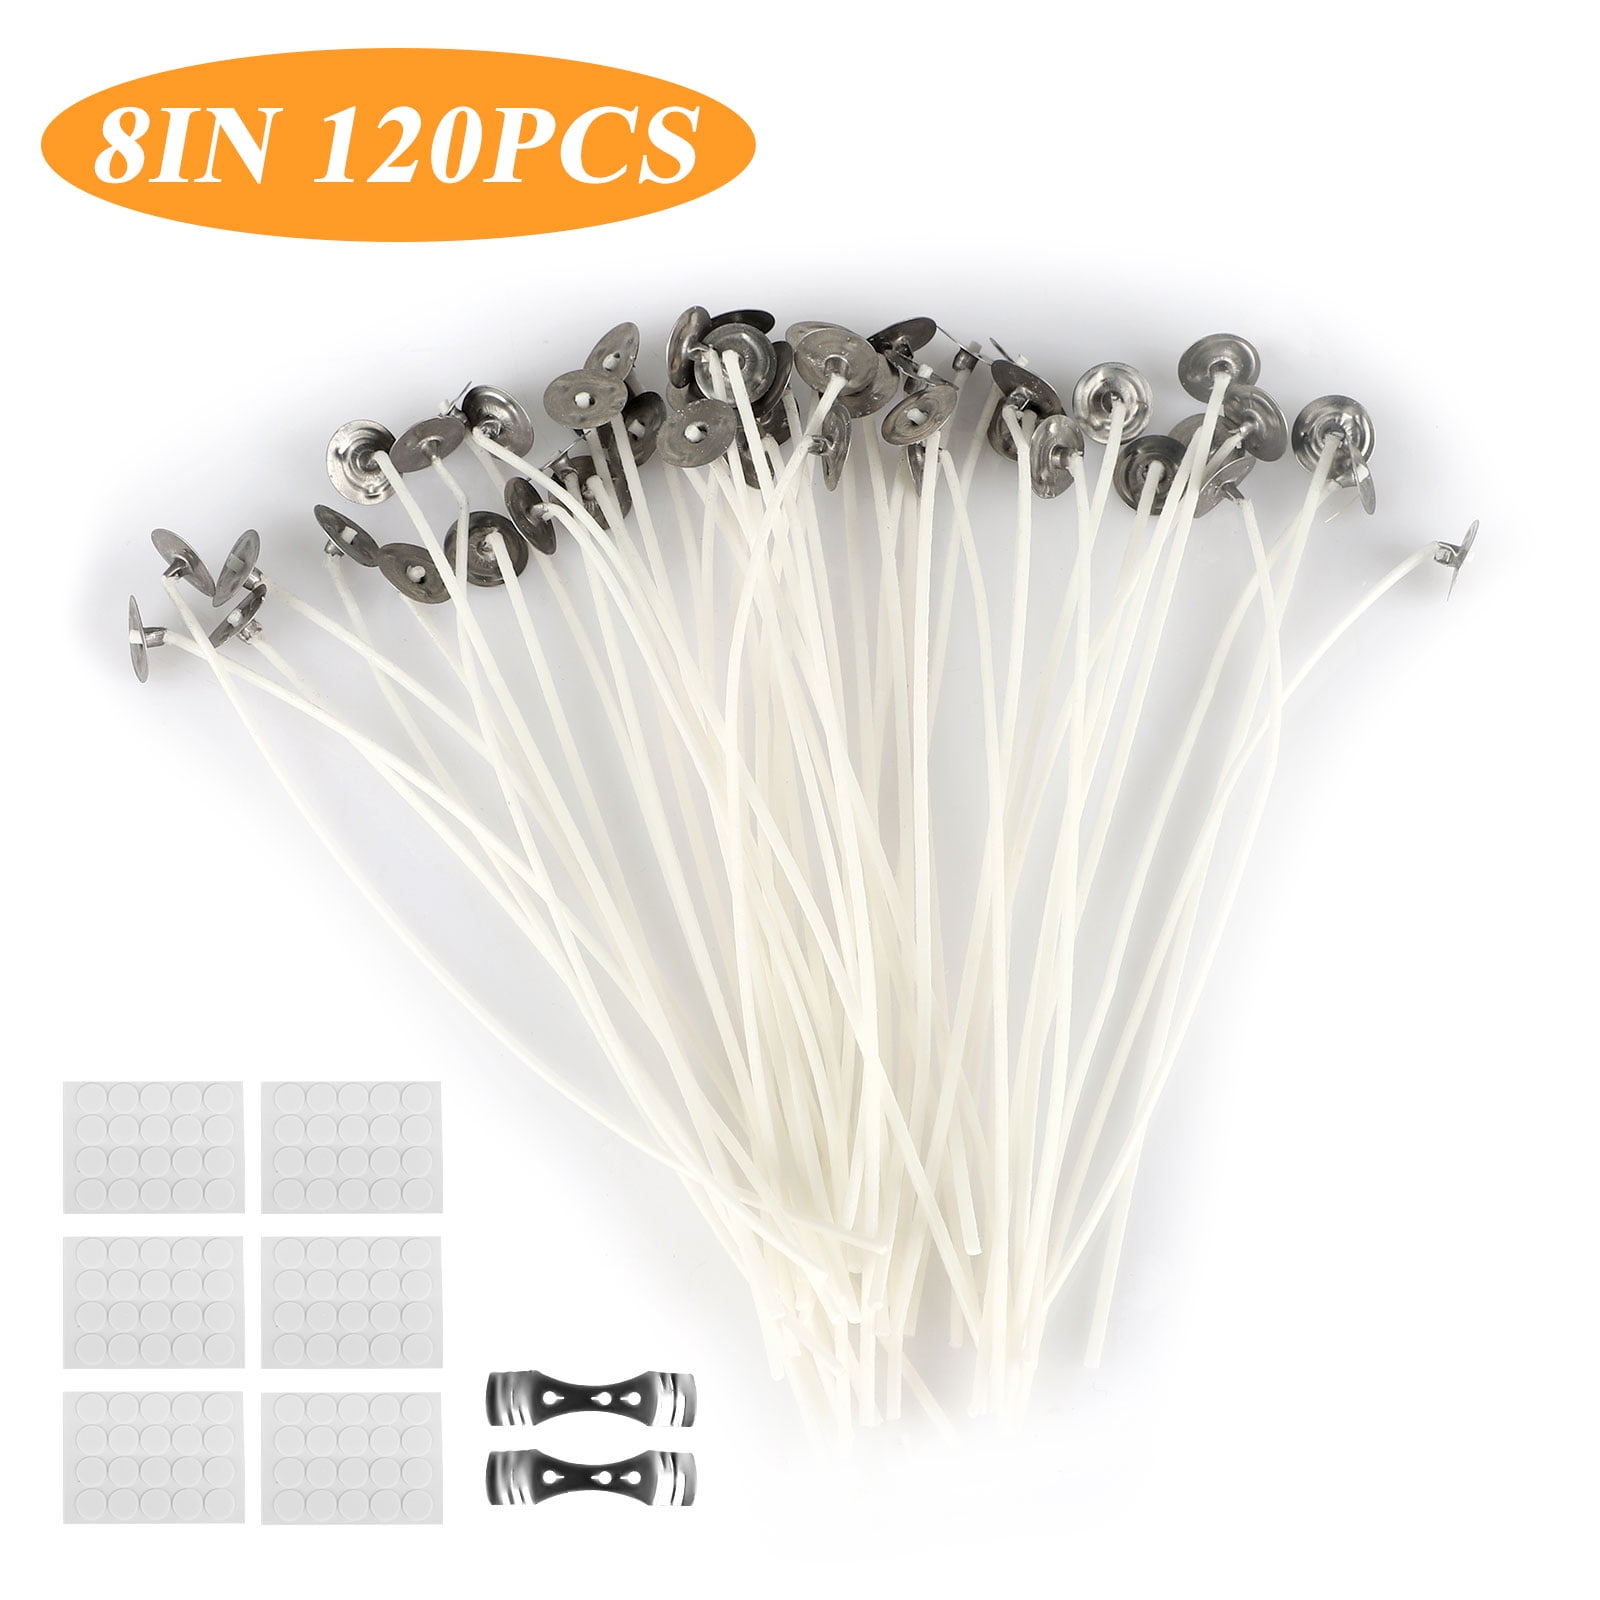 50pcs 8Inch Candle Wicks Cotton Core Waxed With Sustainers Candle Making Supply